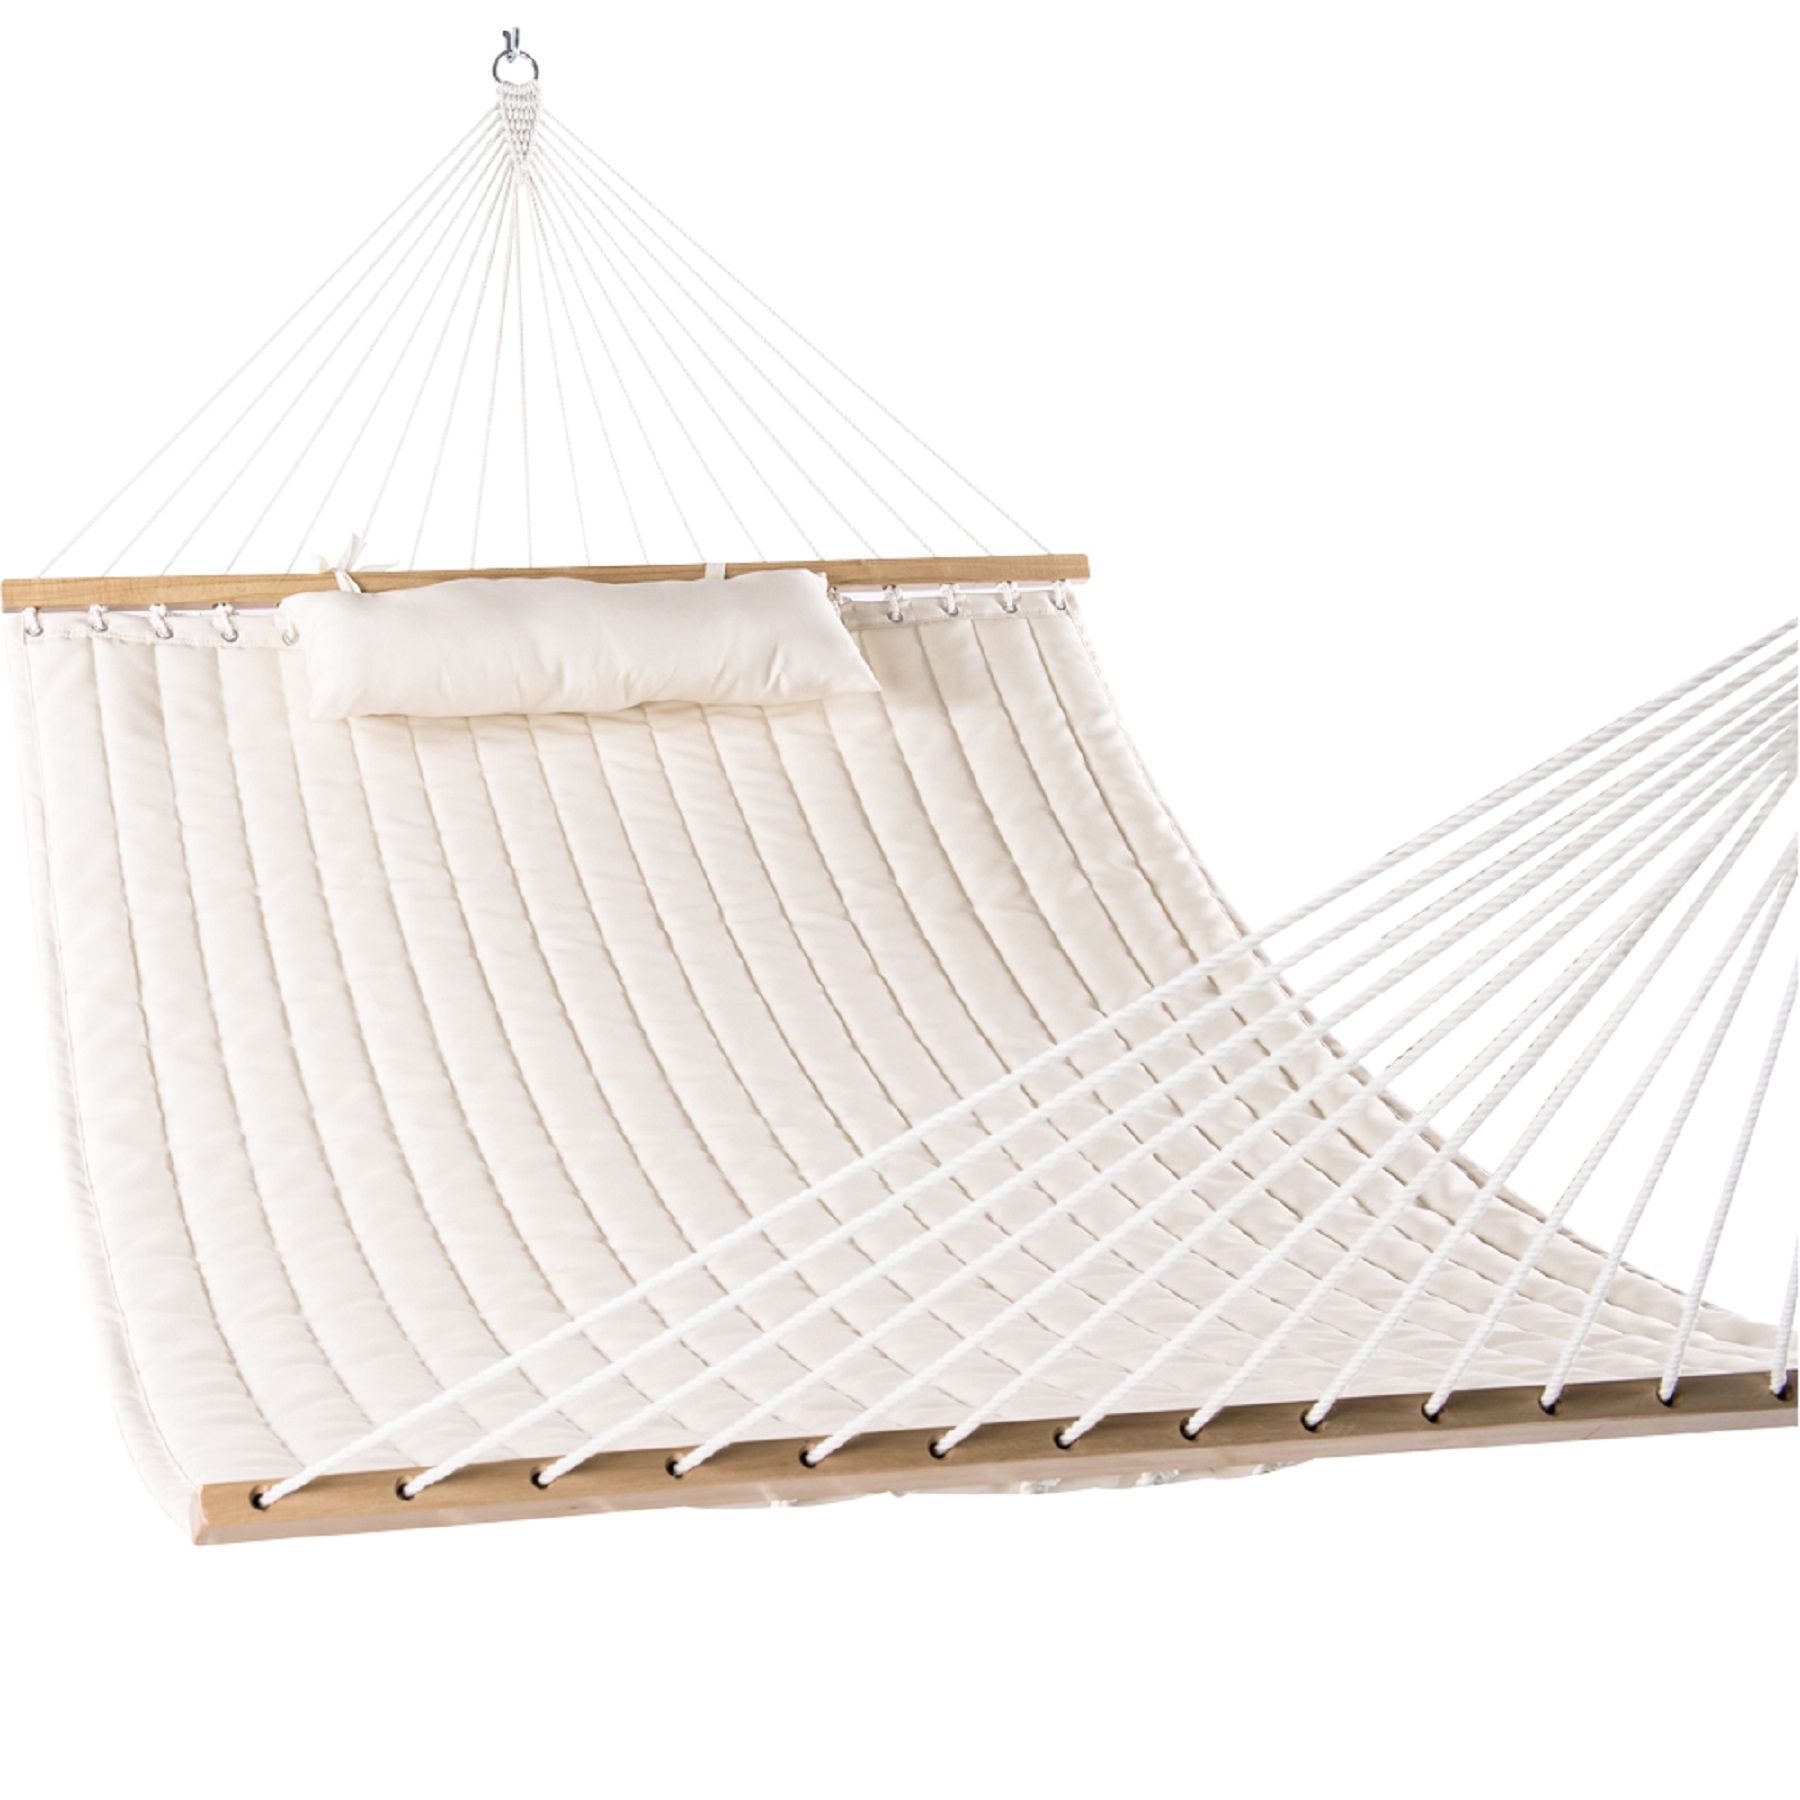 Double Quilted Cotton Fabric Swing Hammock with Pillow Beige 450 lbs Capacity without Stand - image 3 of 8